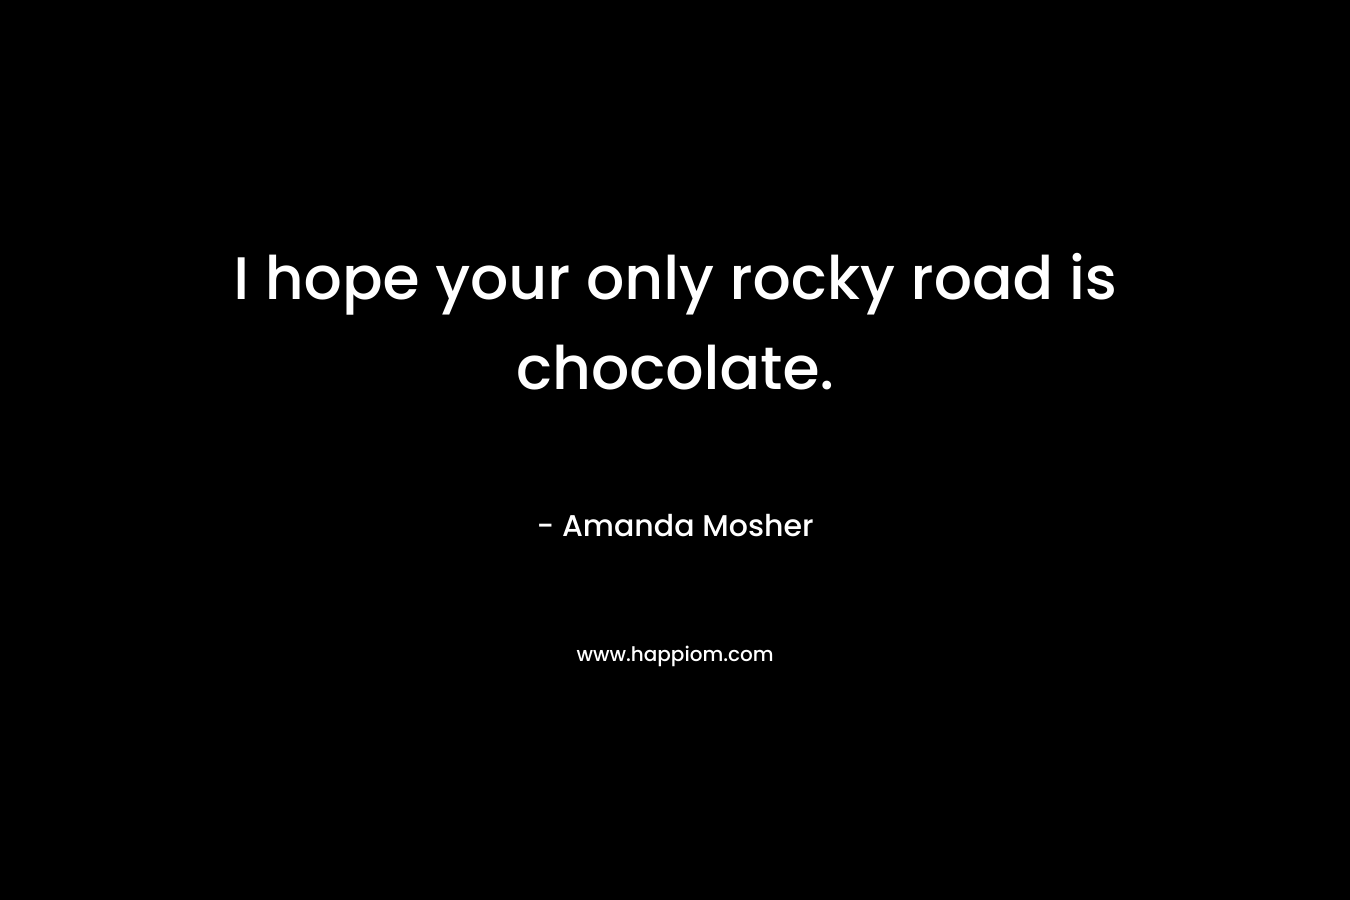 I hope your only rocky road is chocolate. – Amanda Mosher